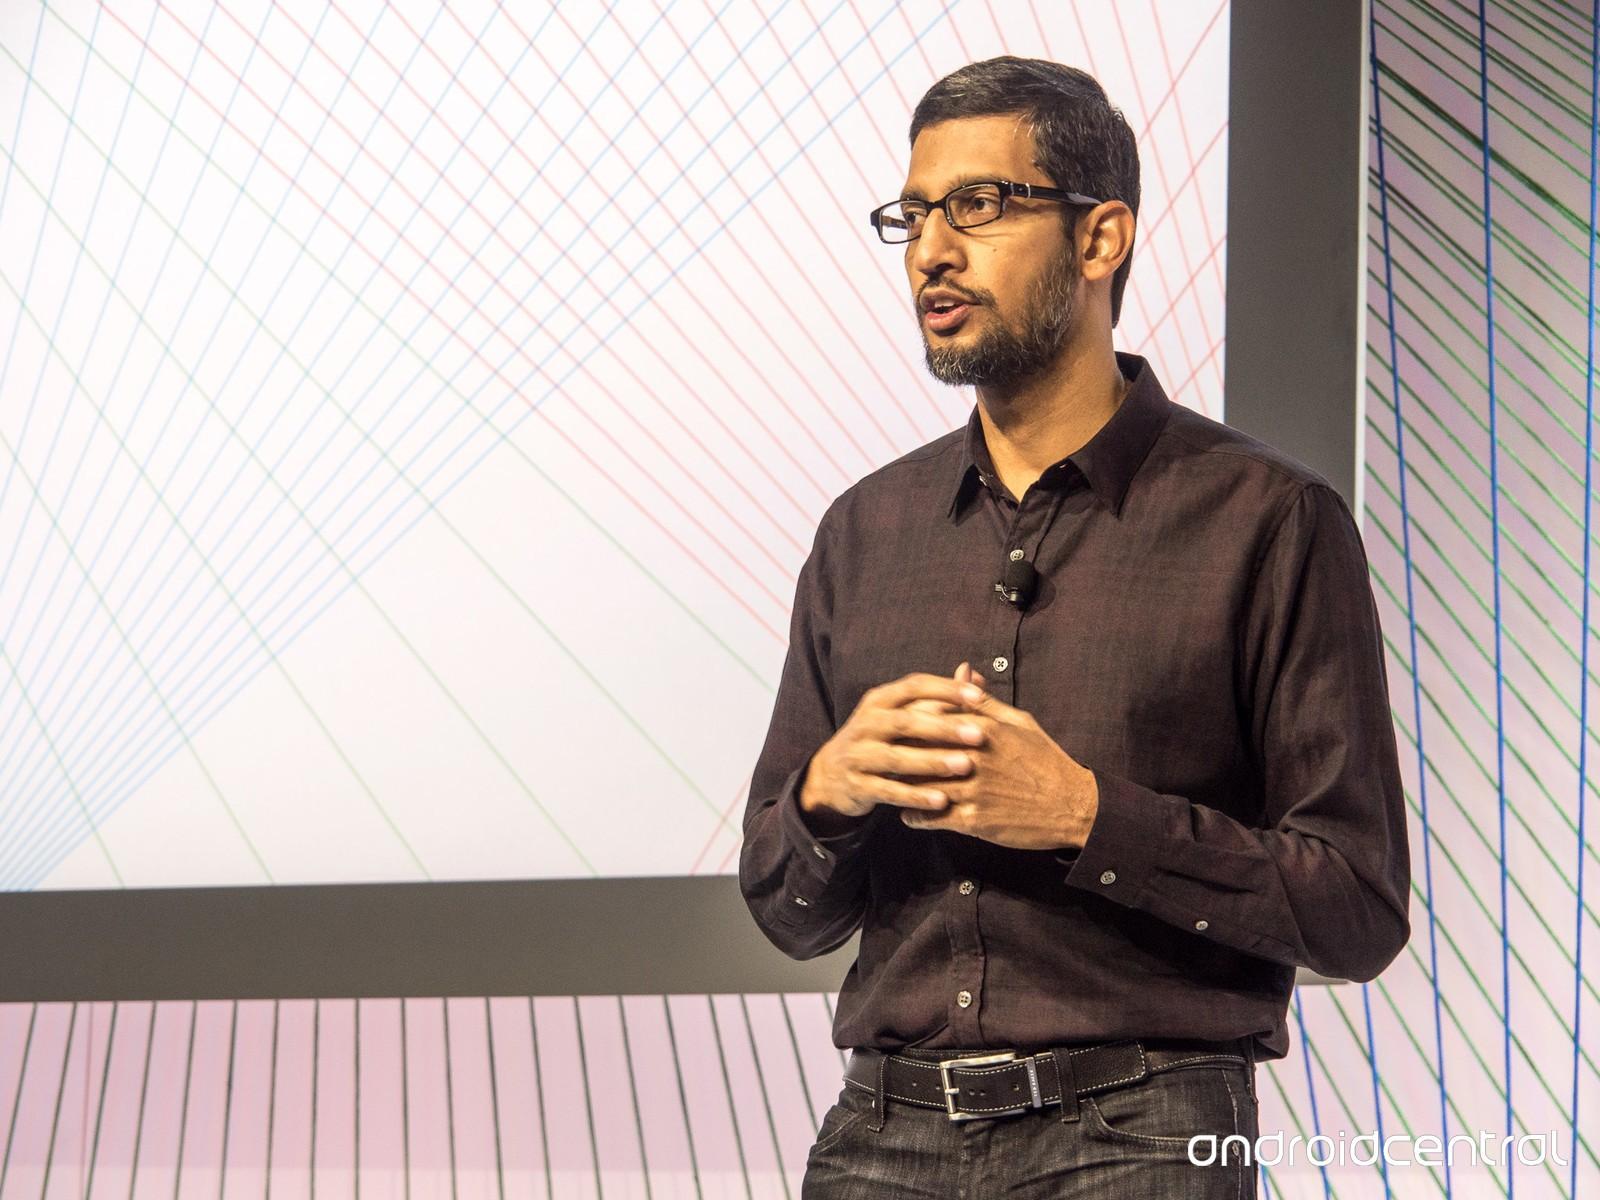 Google CEO tweets support for Apple's stance in encryption debate